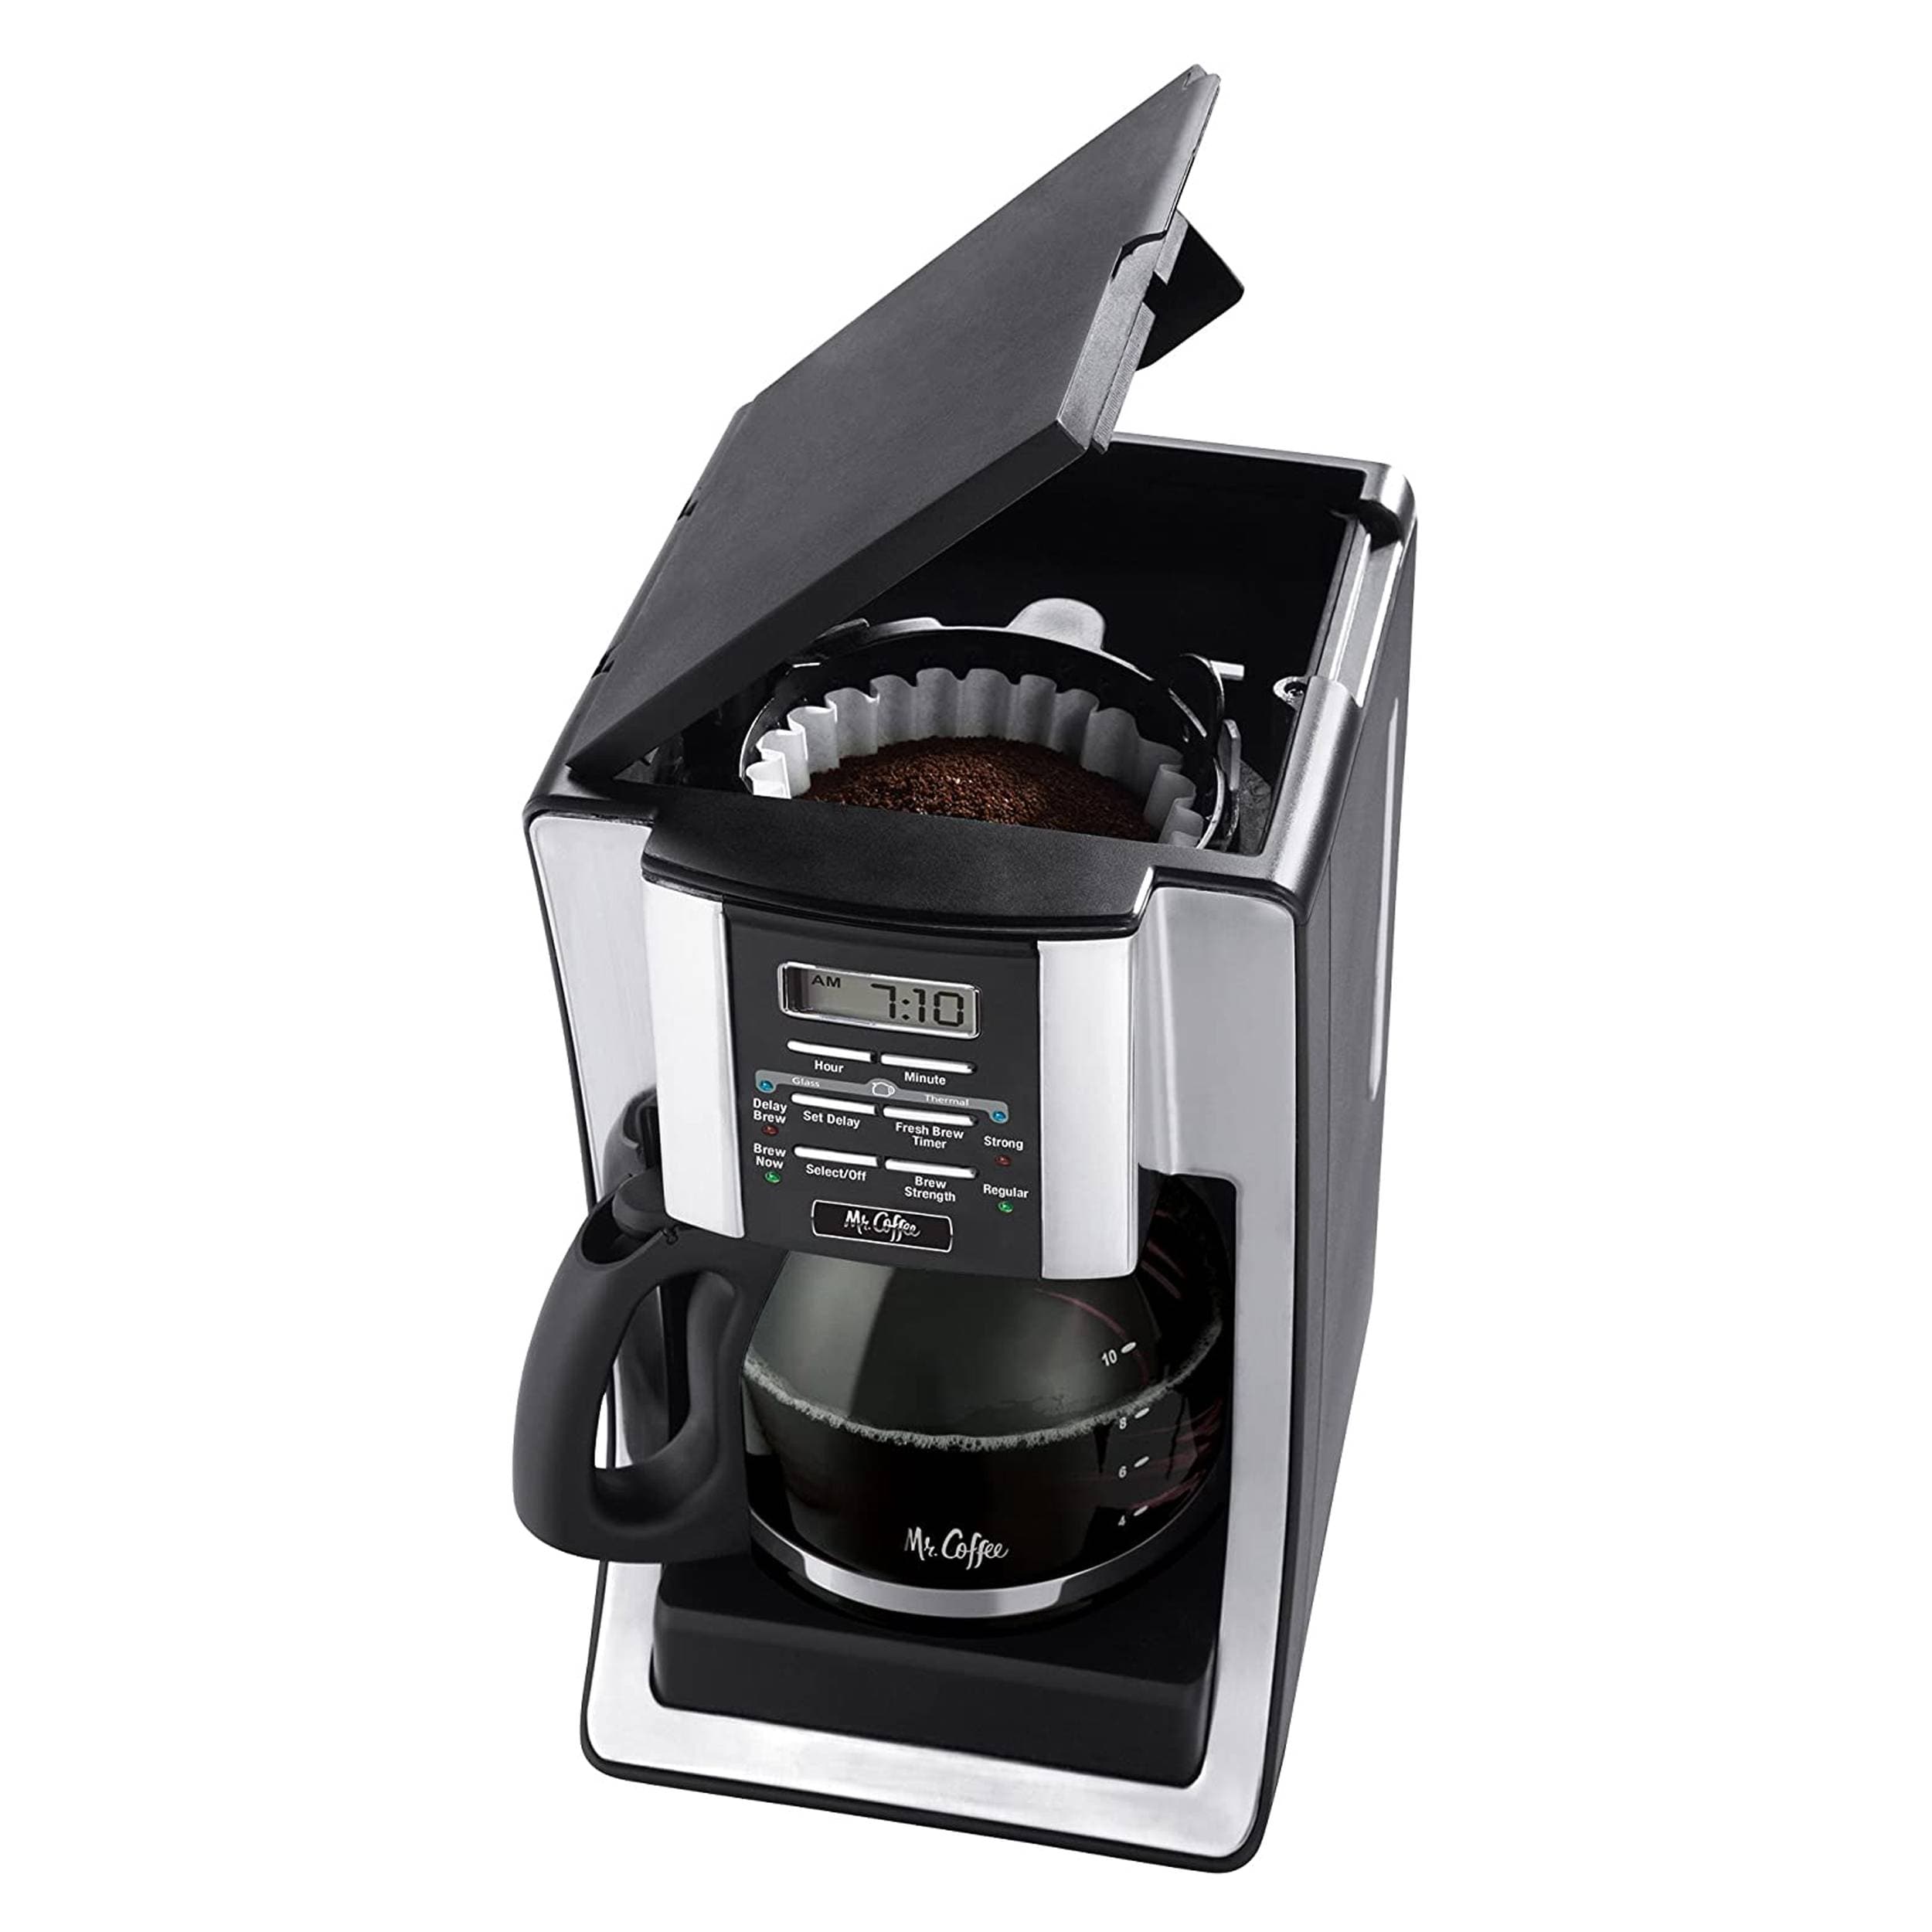 Mr. Coffee 12-Cup Coffee Maker with Rapid Brew System Stainless